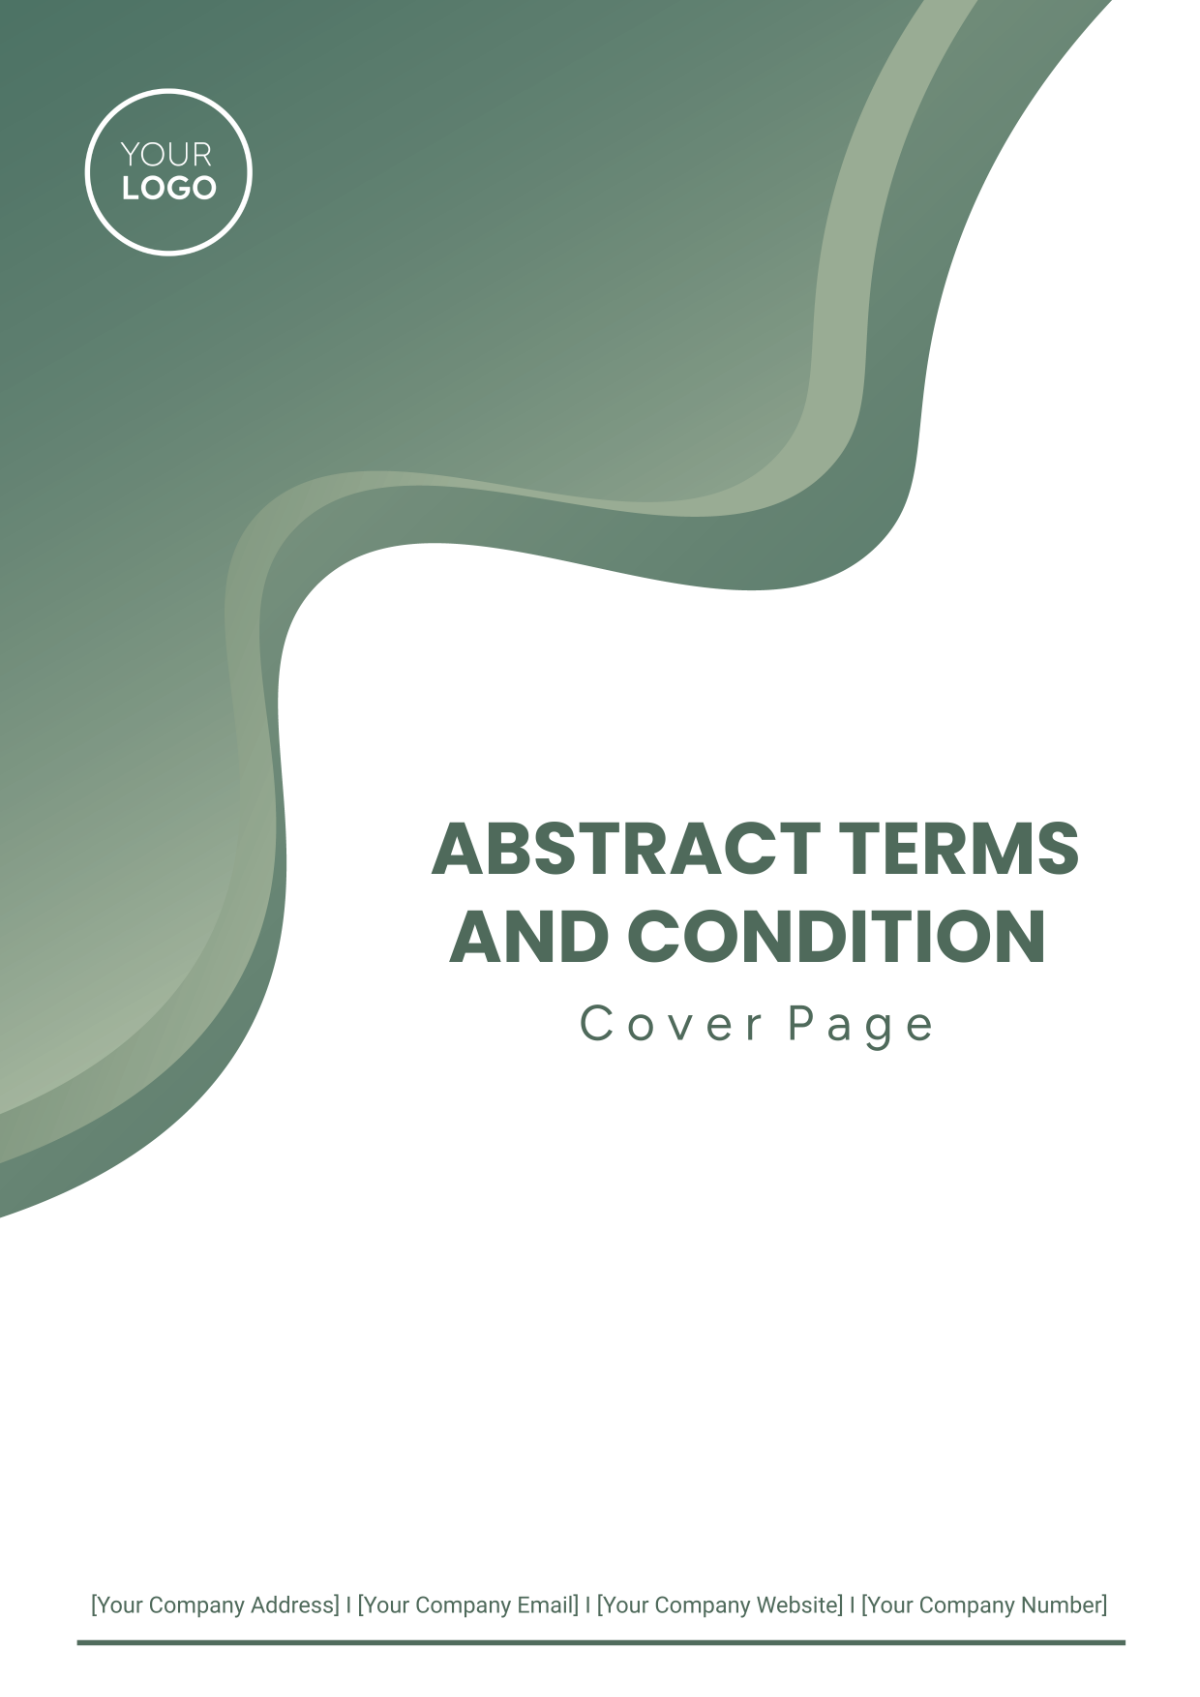 Abstract Terms and Conditions Cover Page